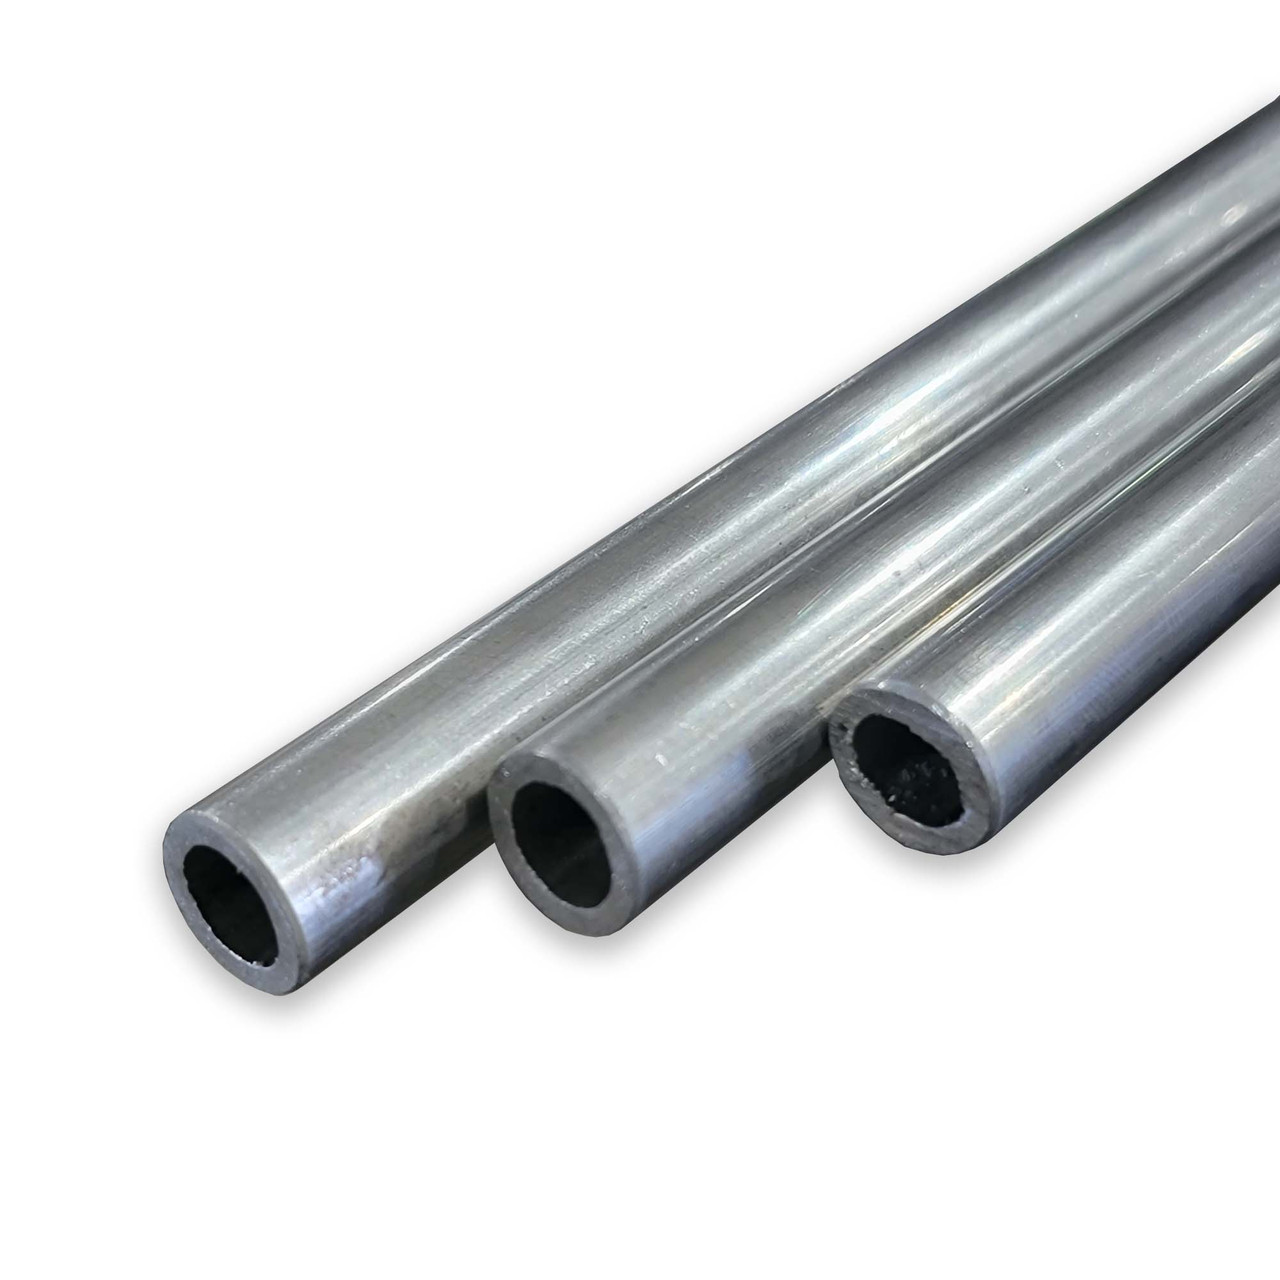 0.500" OD x 0.083" Wall x 48 inches (3 Pack), 316 Stainless Steel Round Tube, Seamless